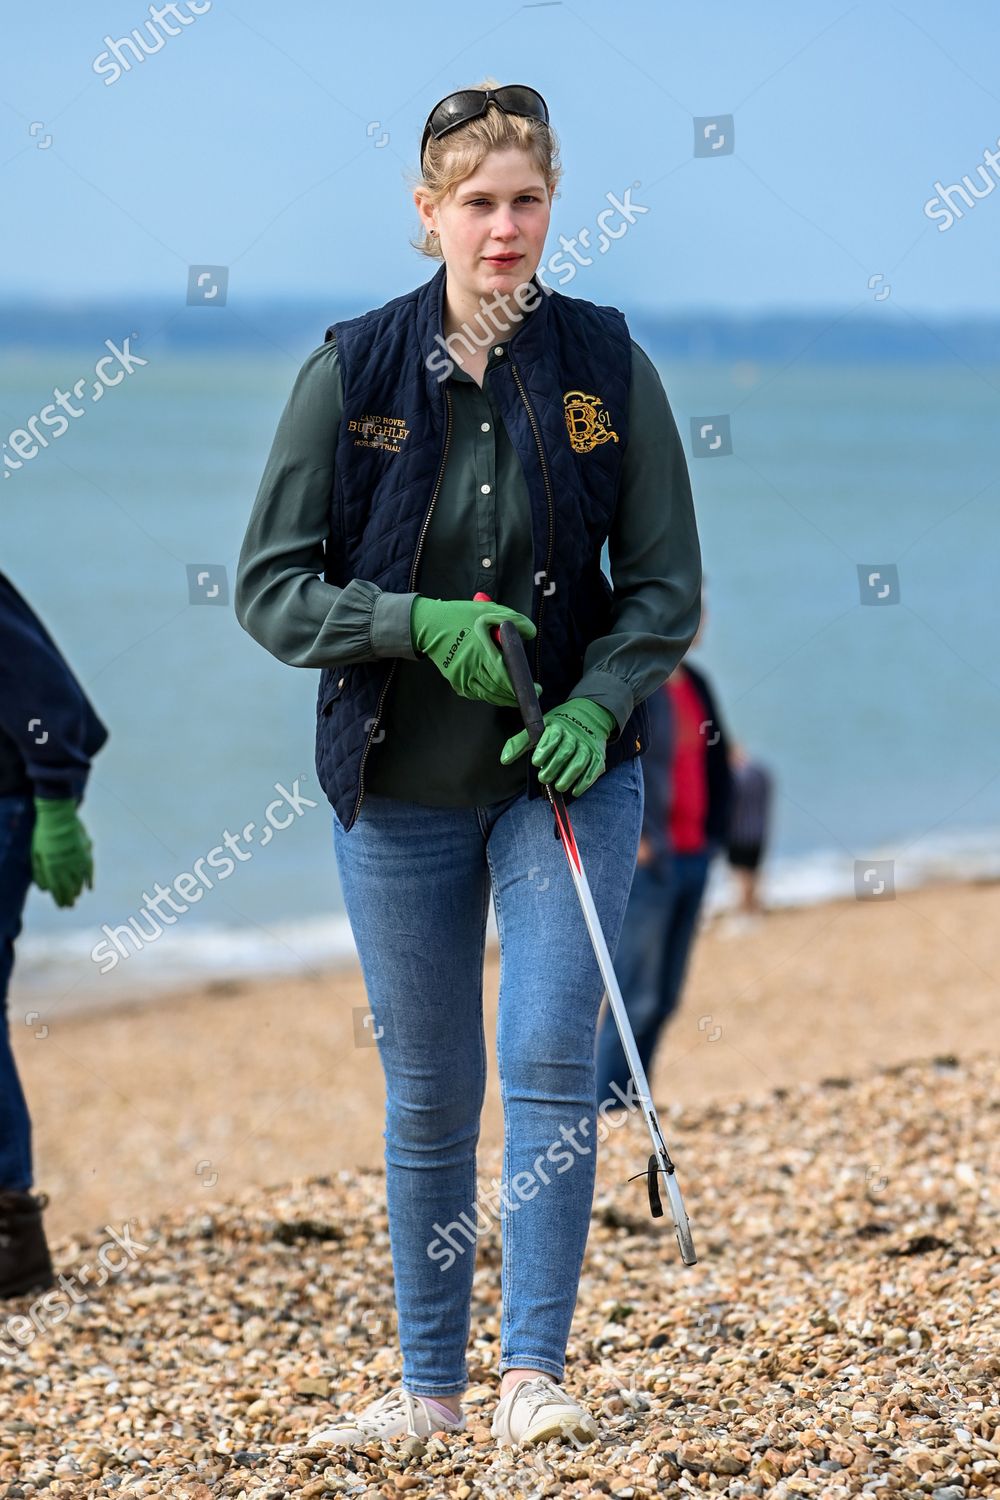 prince-edward-and-sophie-countess-of-wessex-great-british-beach-clean-southsea-beach-portsmouth-uk-shutterstock-editorial-10782998bf.jpg